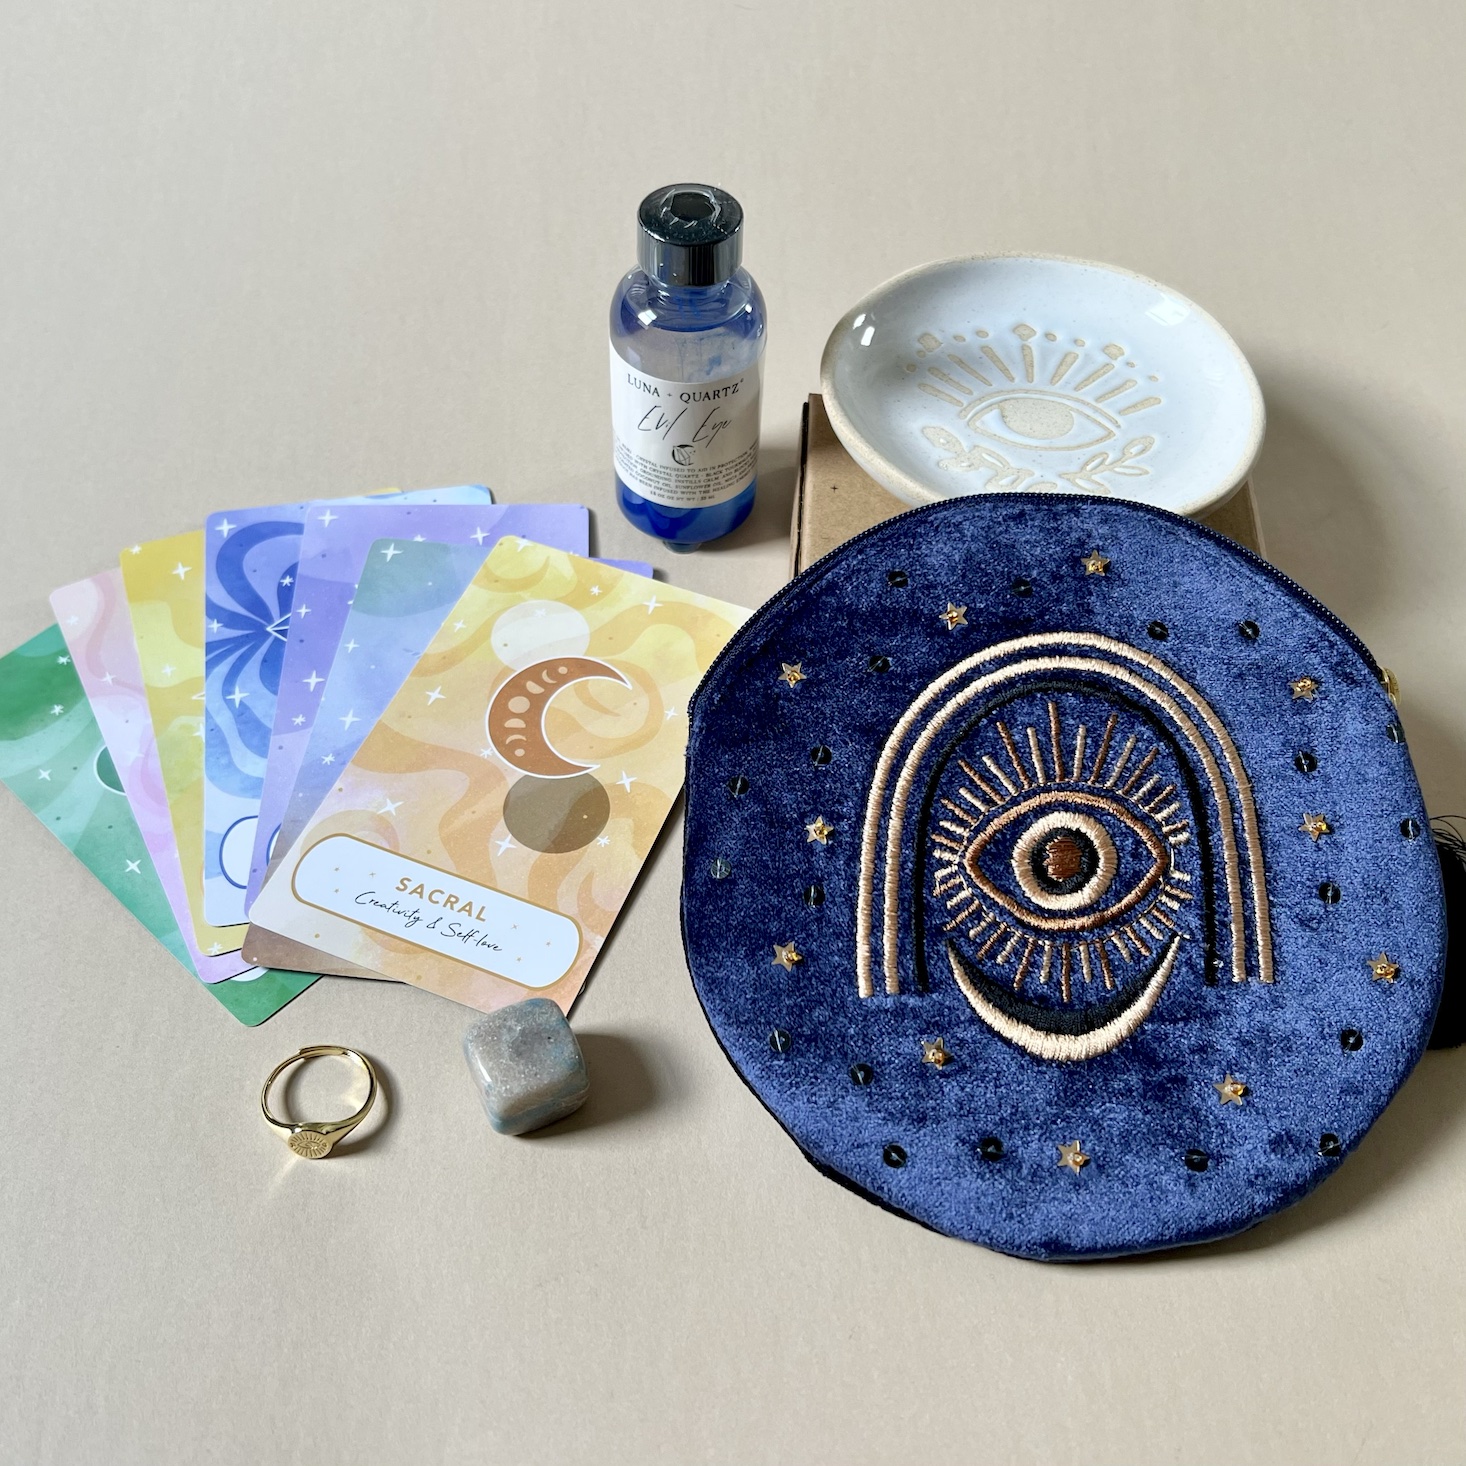 Goddess Provisions “Third Eye Open” April 2022 Review